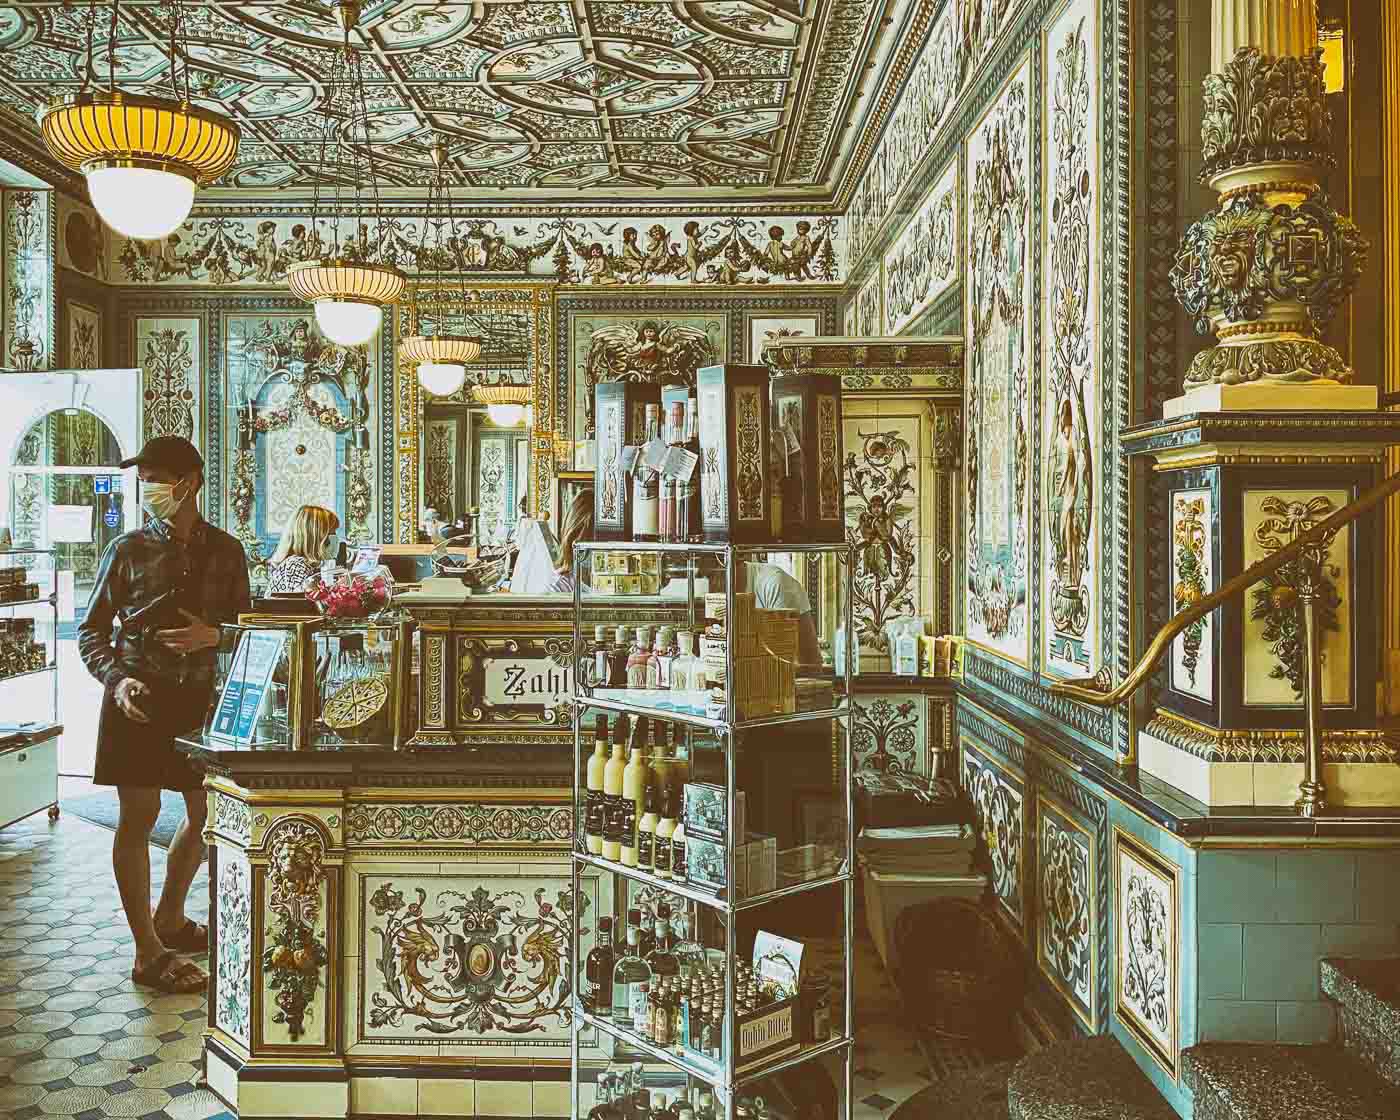 Pfunds Molkerei in Dresden: Discover the World’s Most Beautiful Milk Shop